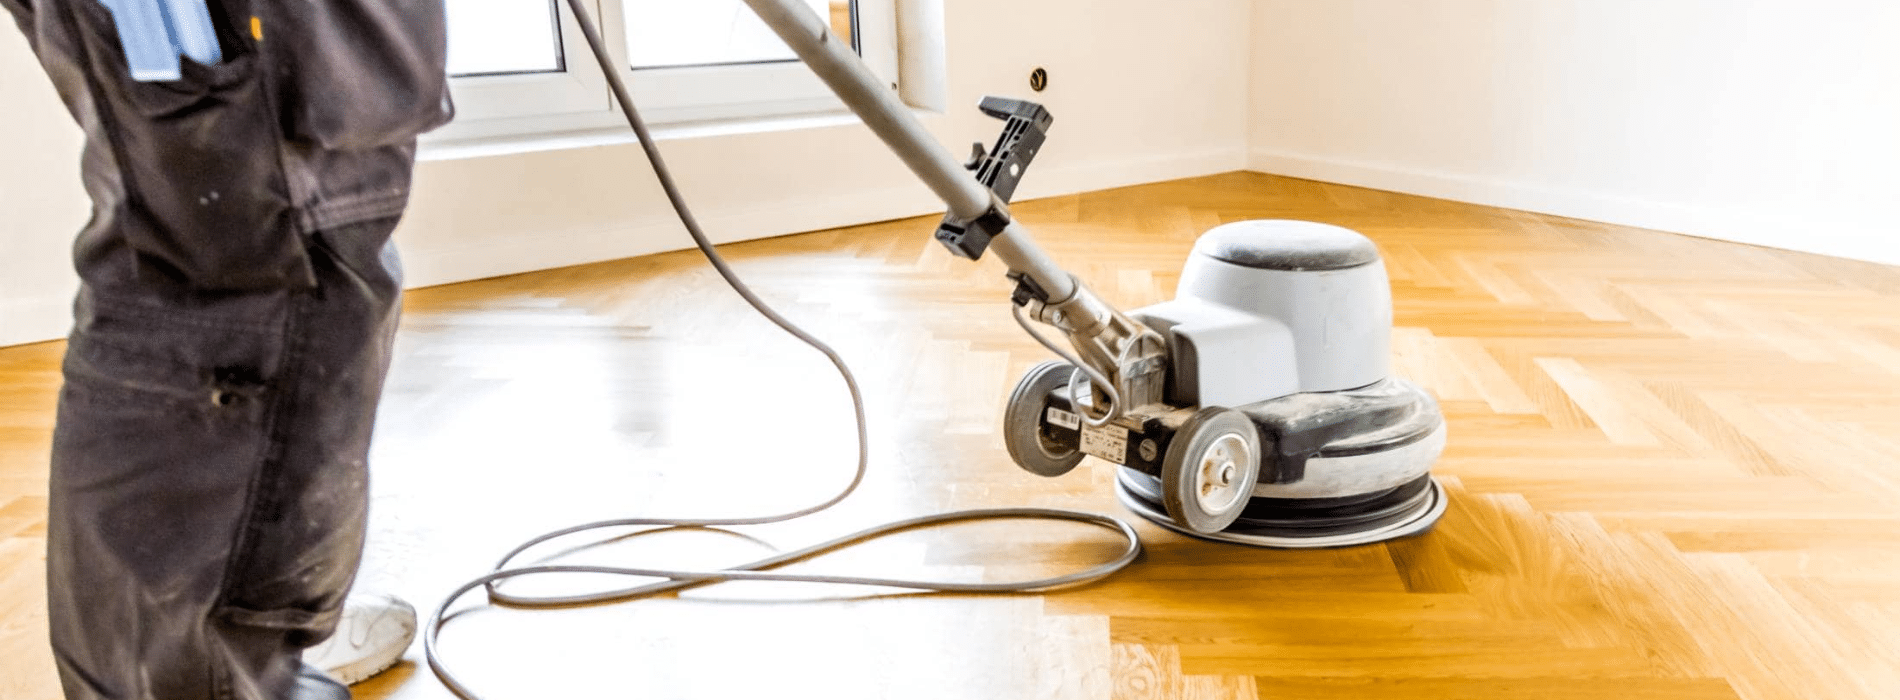 Mr Sander® in Southgate, N14 utilizing Bona Belt for superior results. The powerful 2.2 kW sander operates at 230V, 50 Hz/60 Hz frequency. Connected to a HEPA-filtered dust extraction system, it guarantees a clean and efficient outcome.